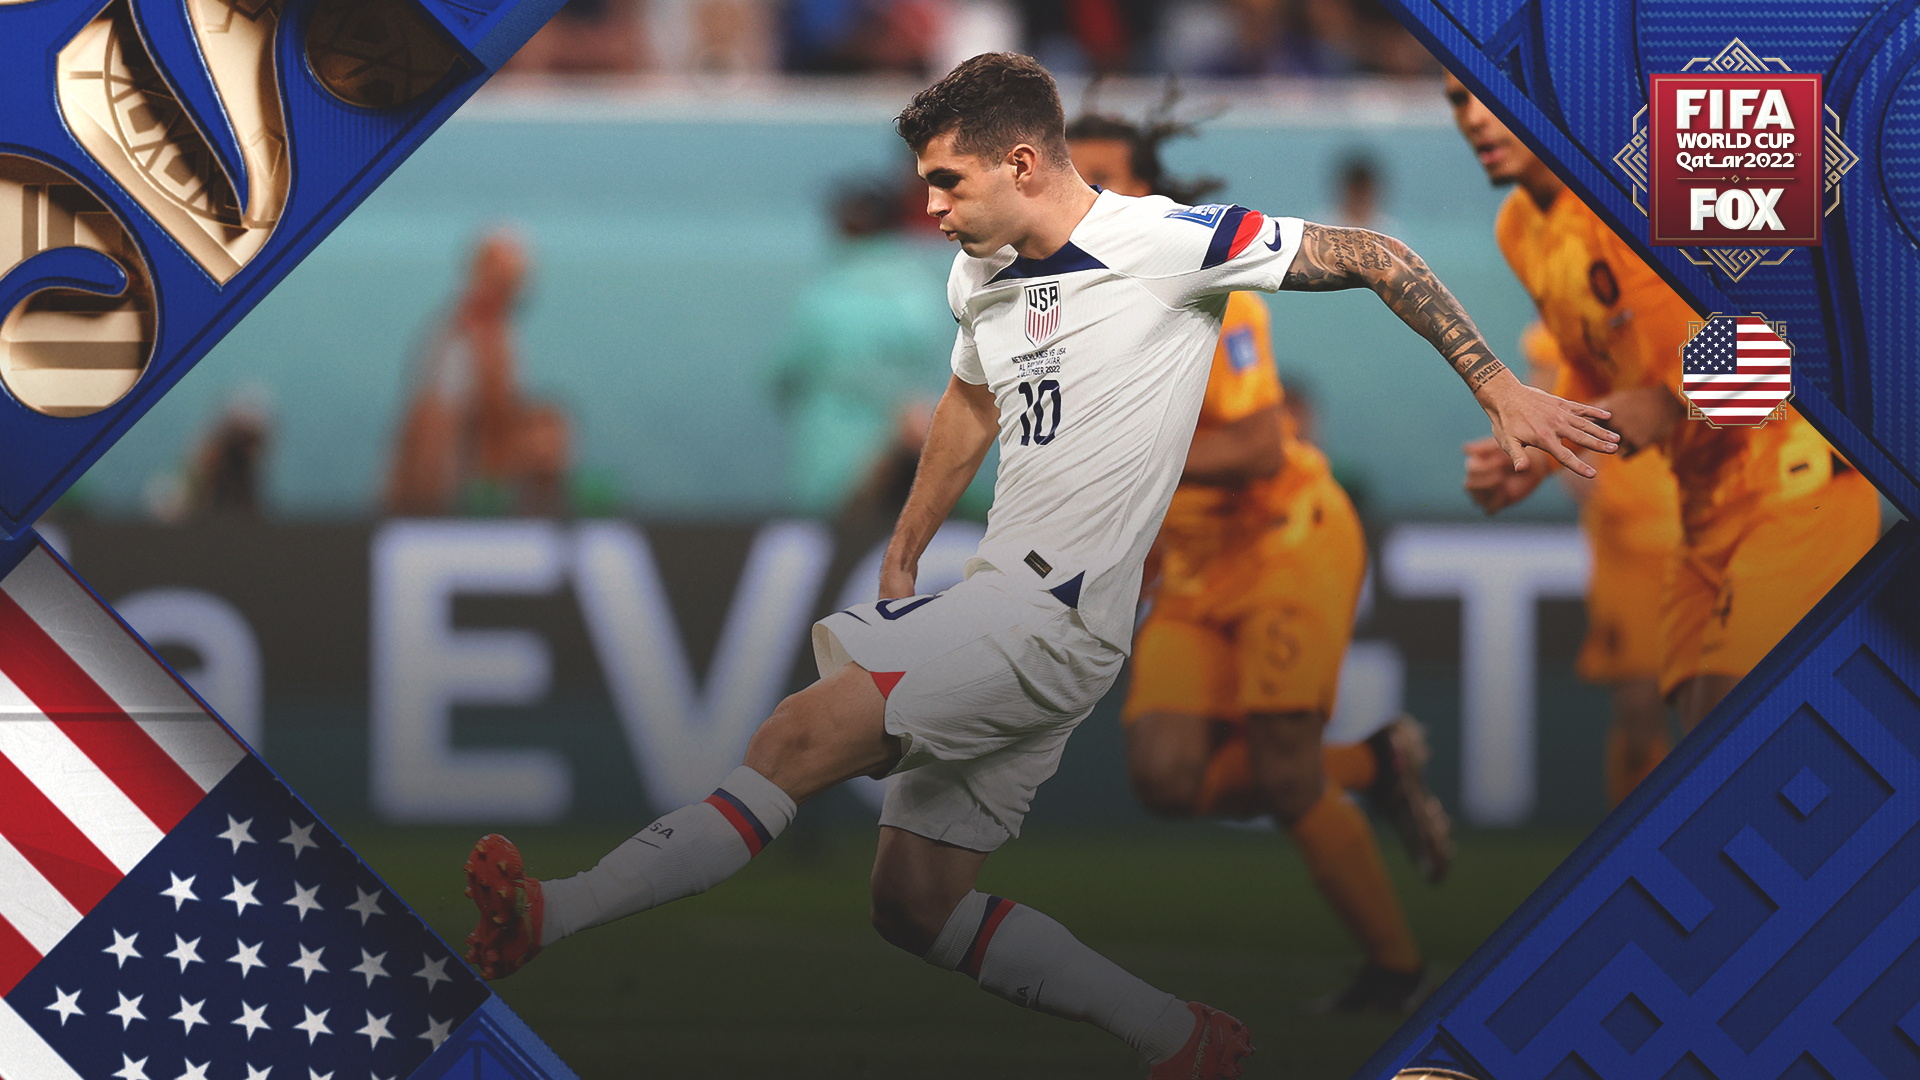 Christian Pulisic's greatness shouldn't be expected to patch USA's most glaring hole